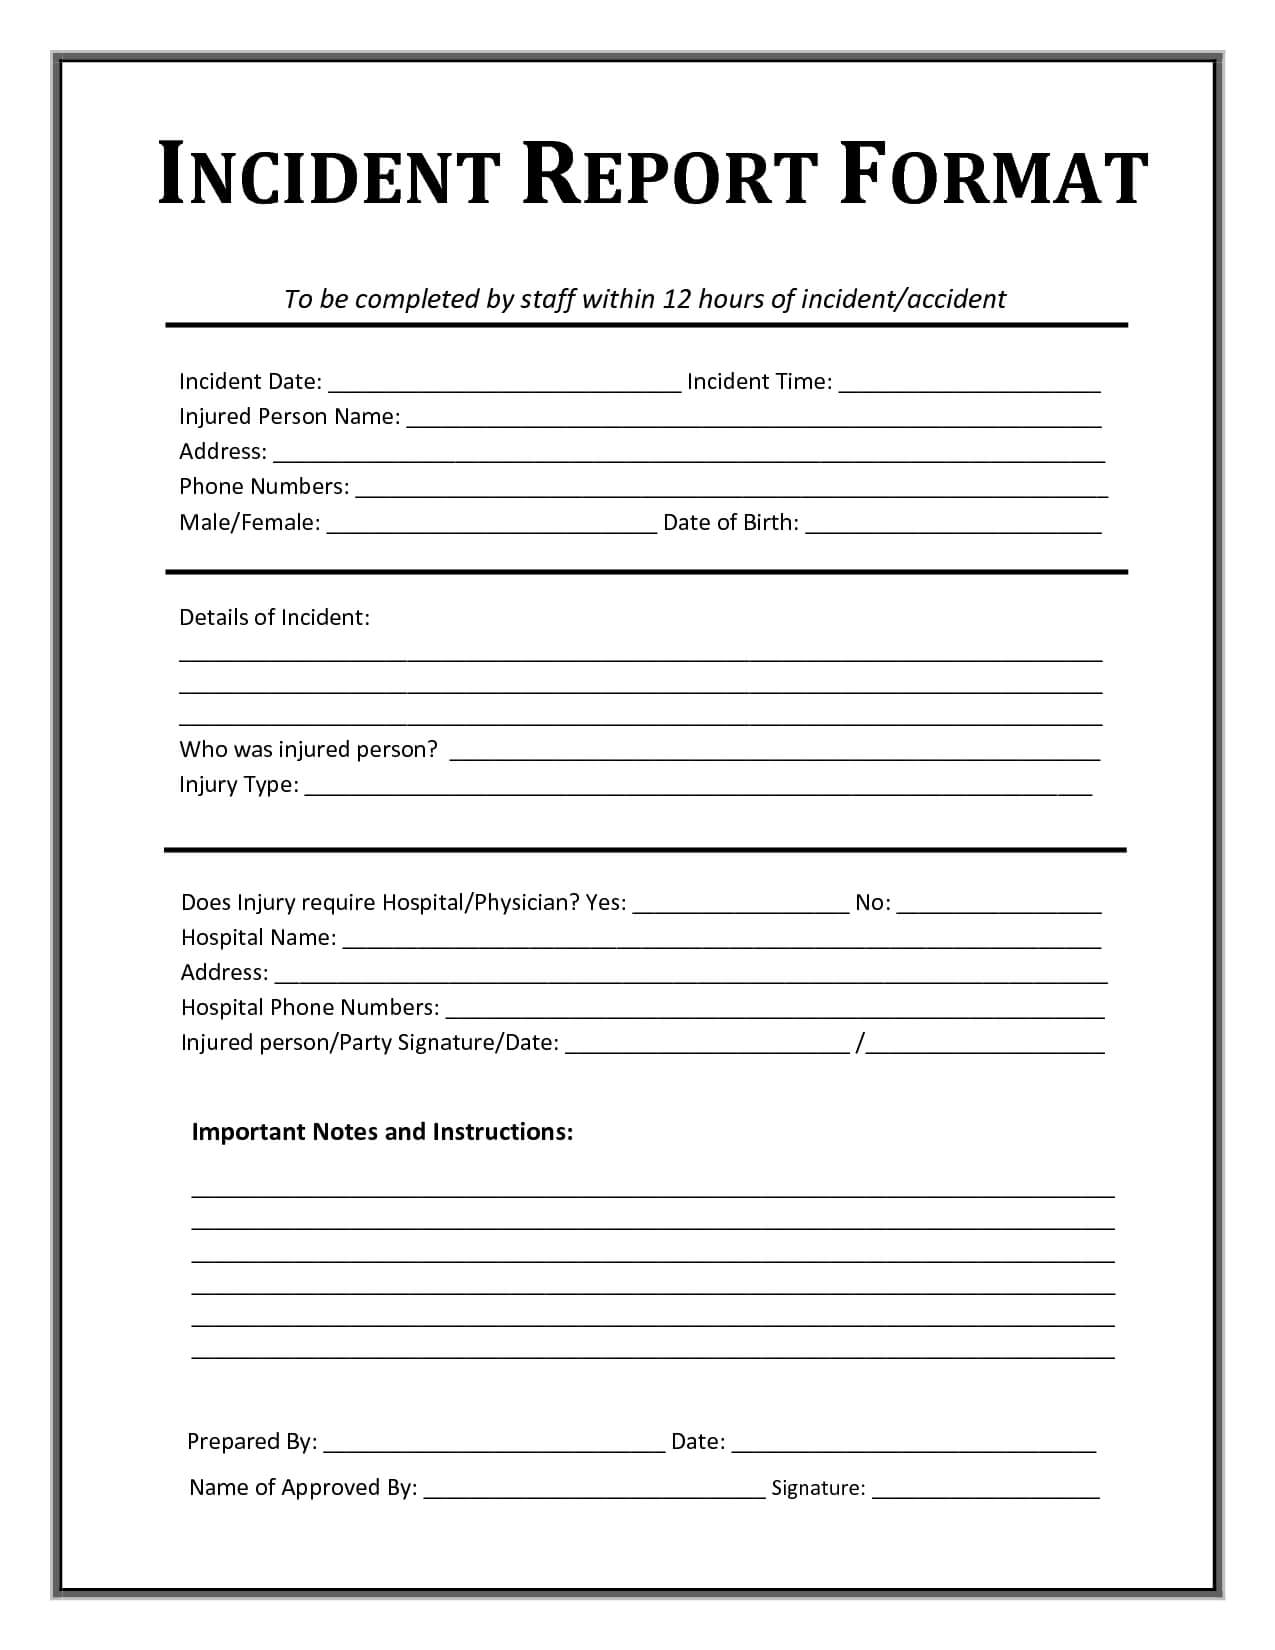 Incident Report Form Template Microsoft Excel | Report Pertaining To Incident Report Book Template